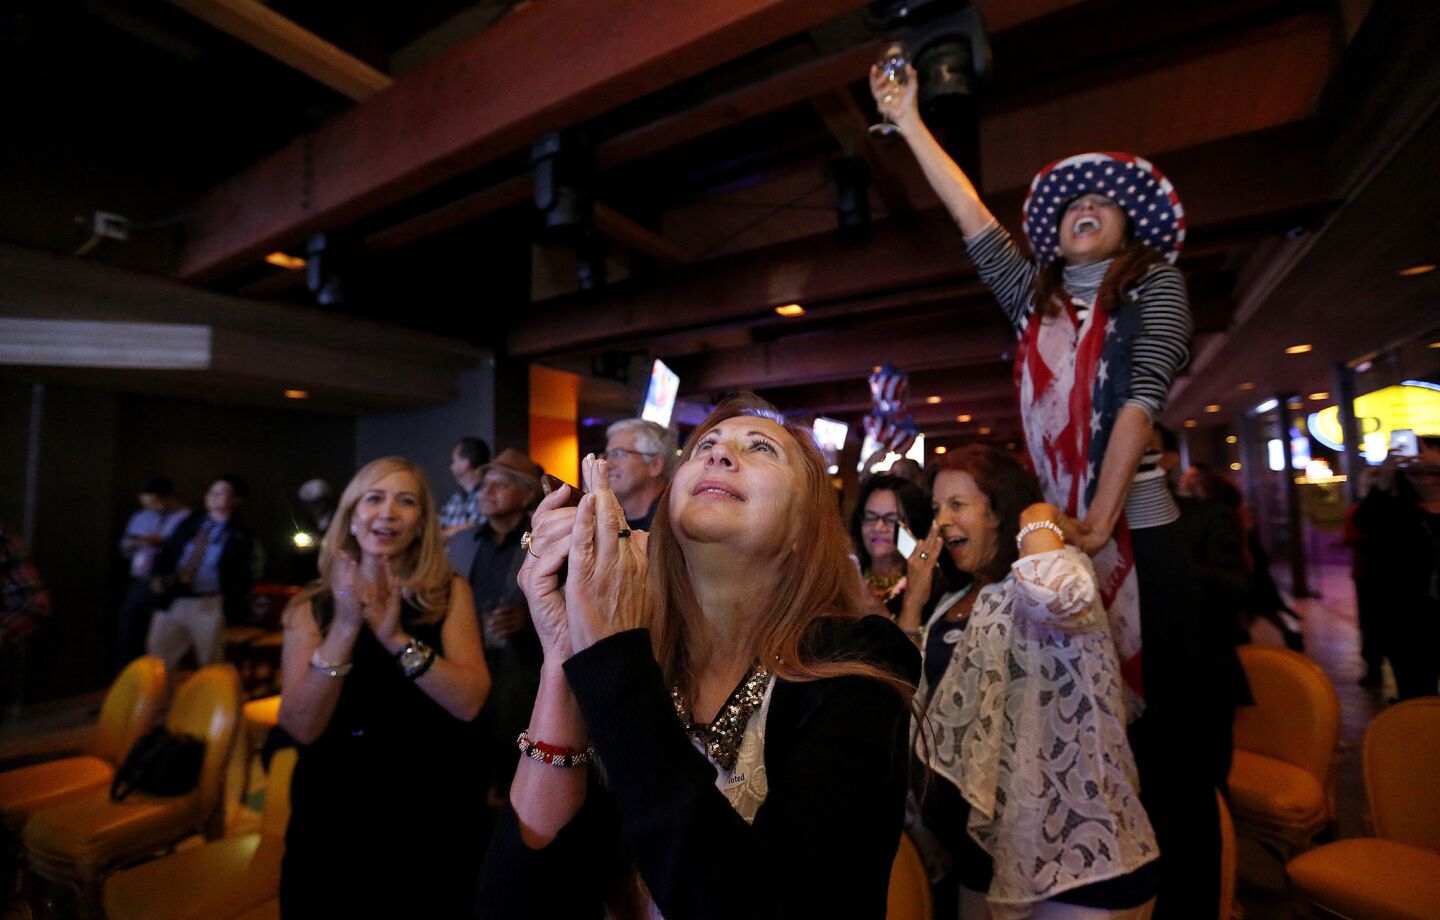 Republicans Enrietta Lee, center, prays, as Sarah McDowell, right, celebrates at the OCGOP election party at China Palace in Newport Beach after the election of Donald Trump as president.